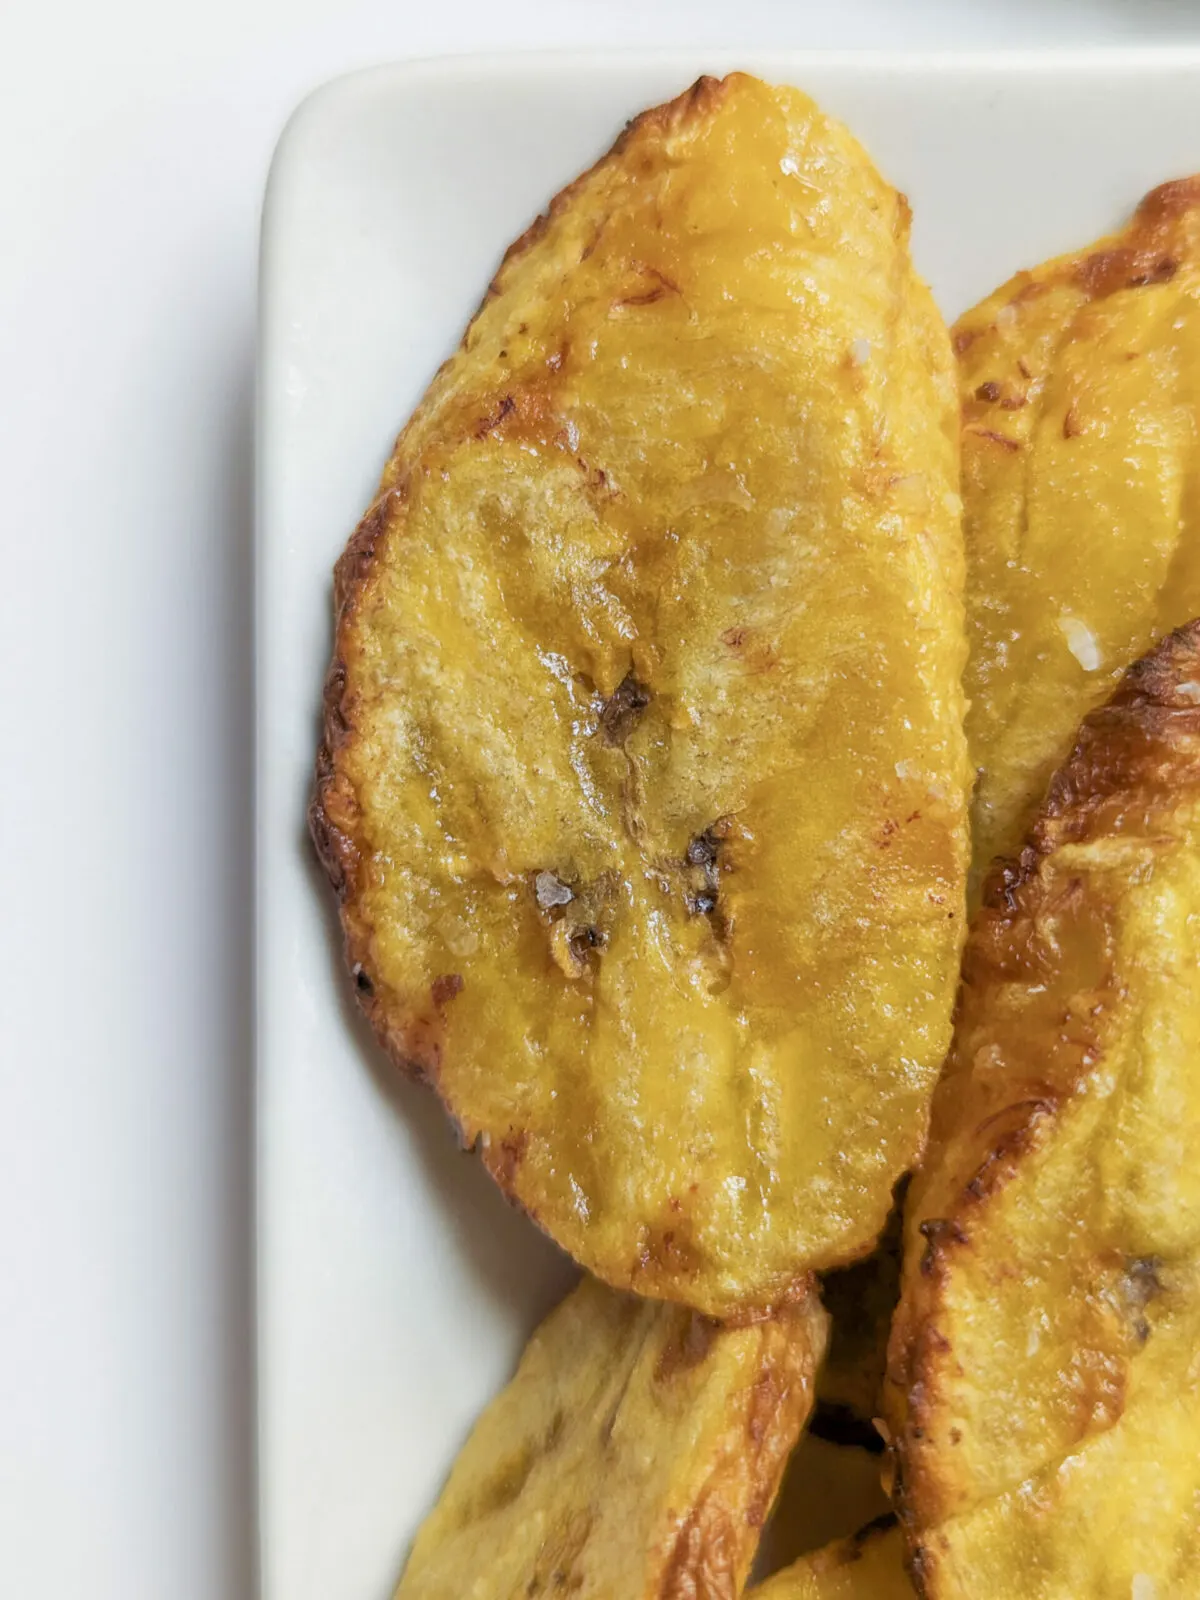 A close up of an air fried plantain.